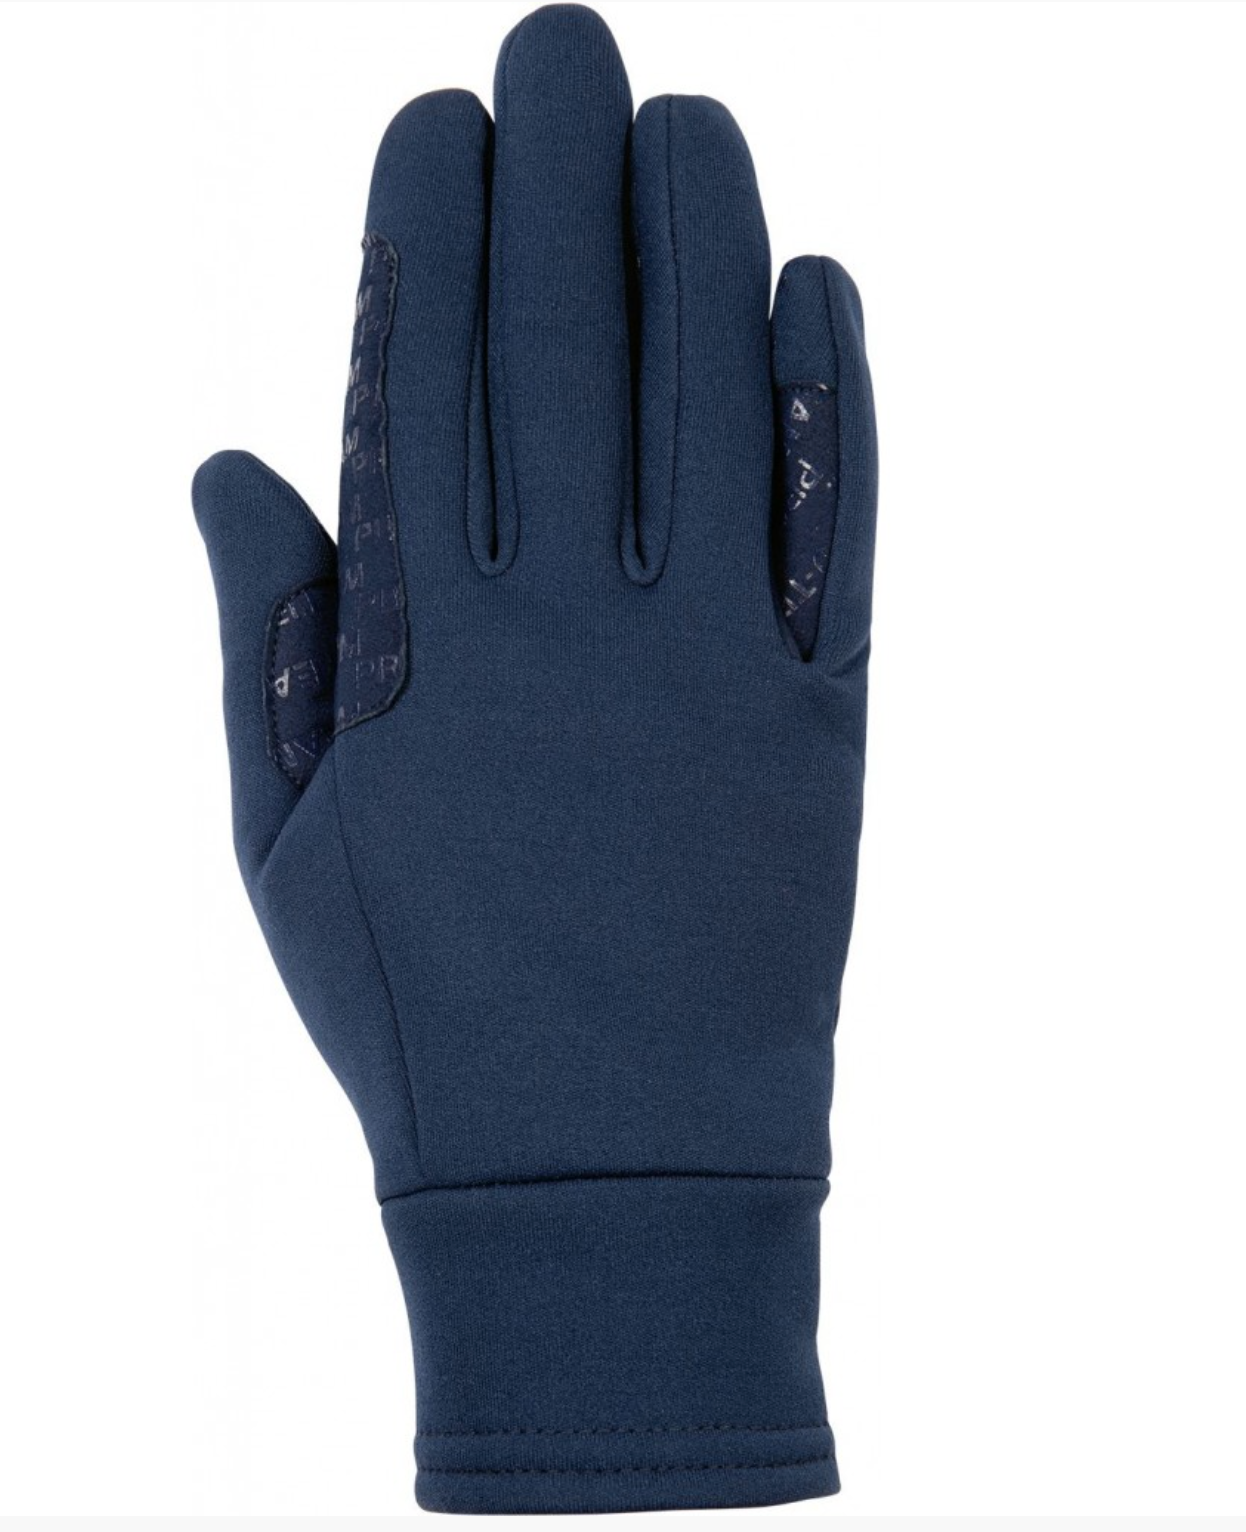 HKM Unisex Fleece Riding Gloves  HKM - Equestrian Fashion Outfitters